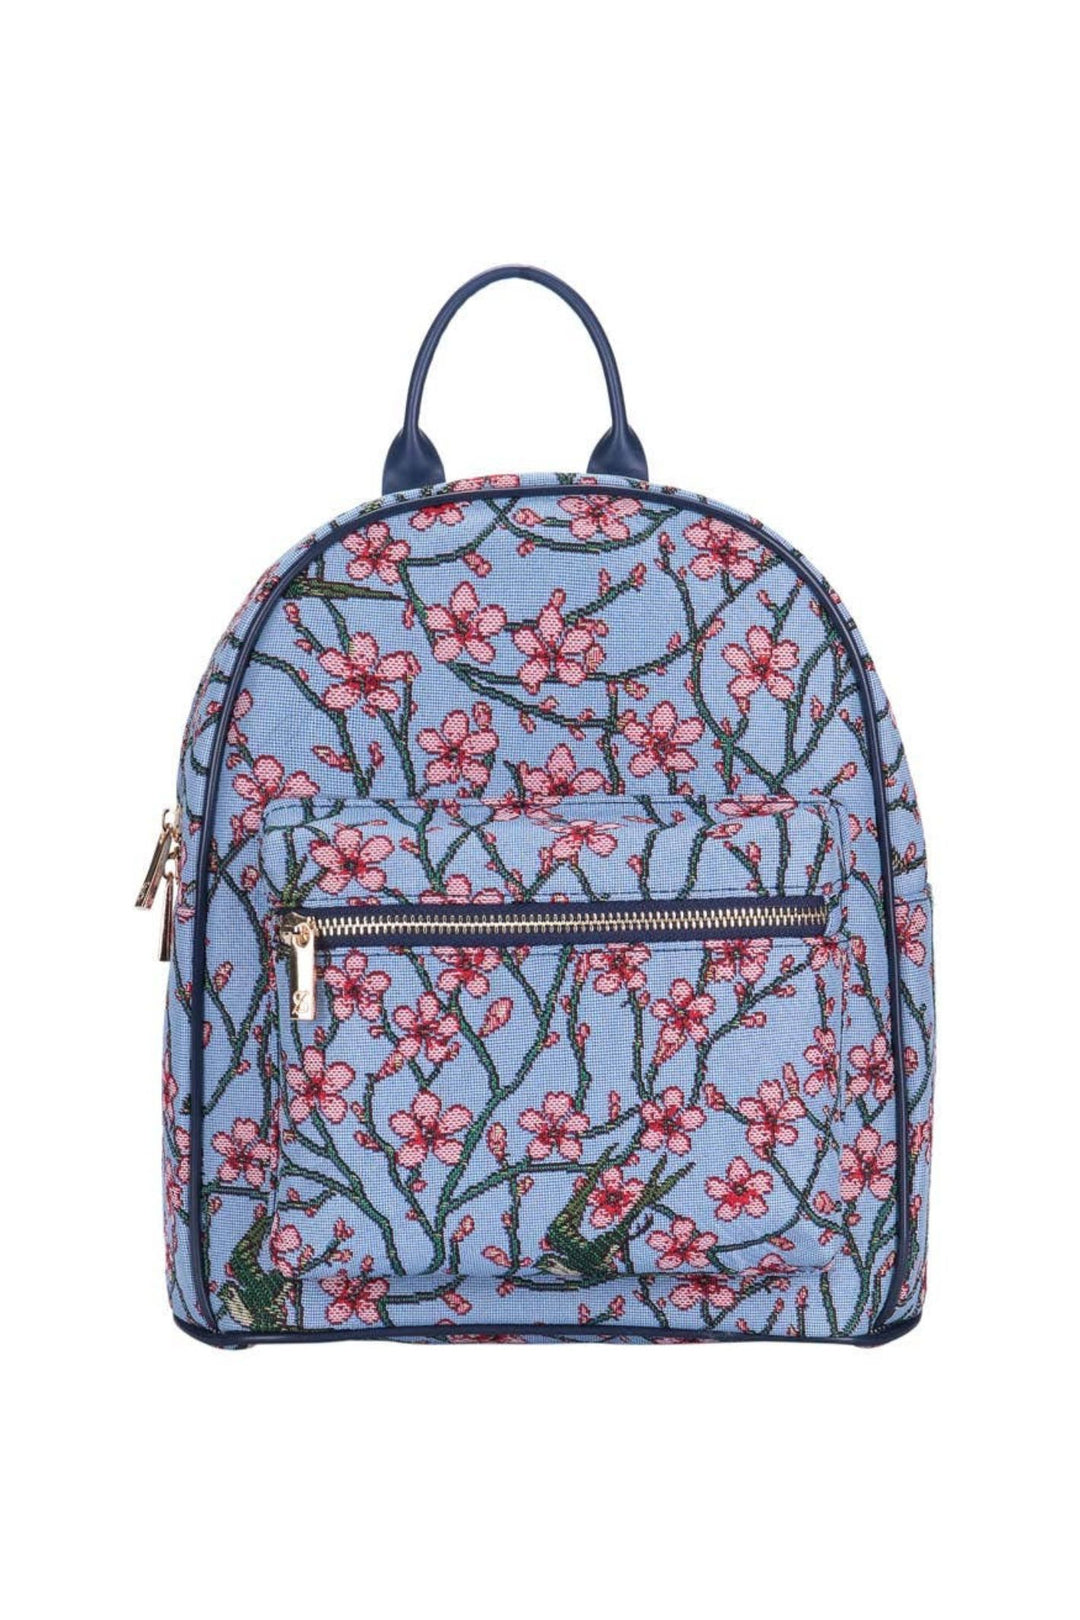 Blue V&A Licensed Almond Blossom and Swallow Daypack